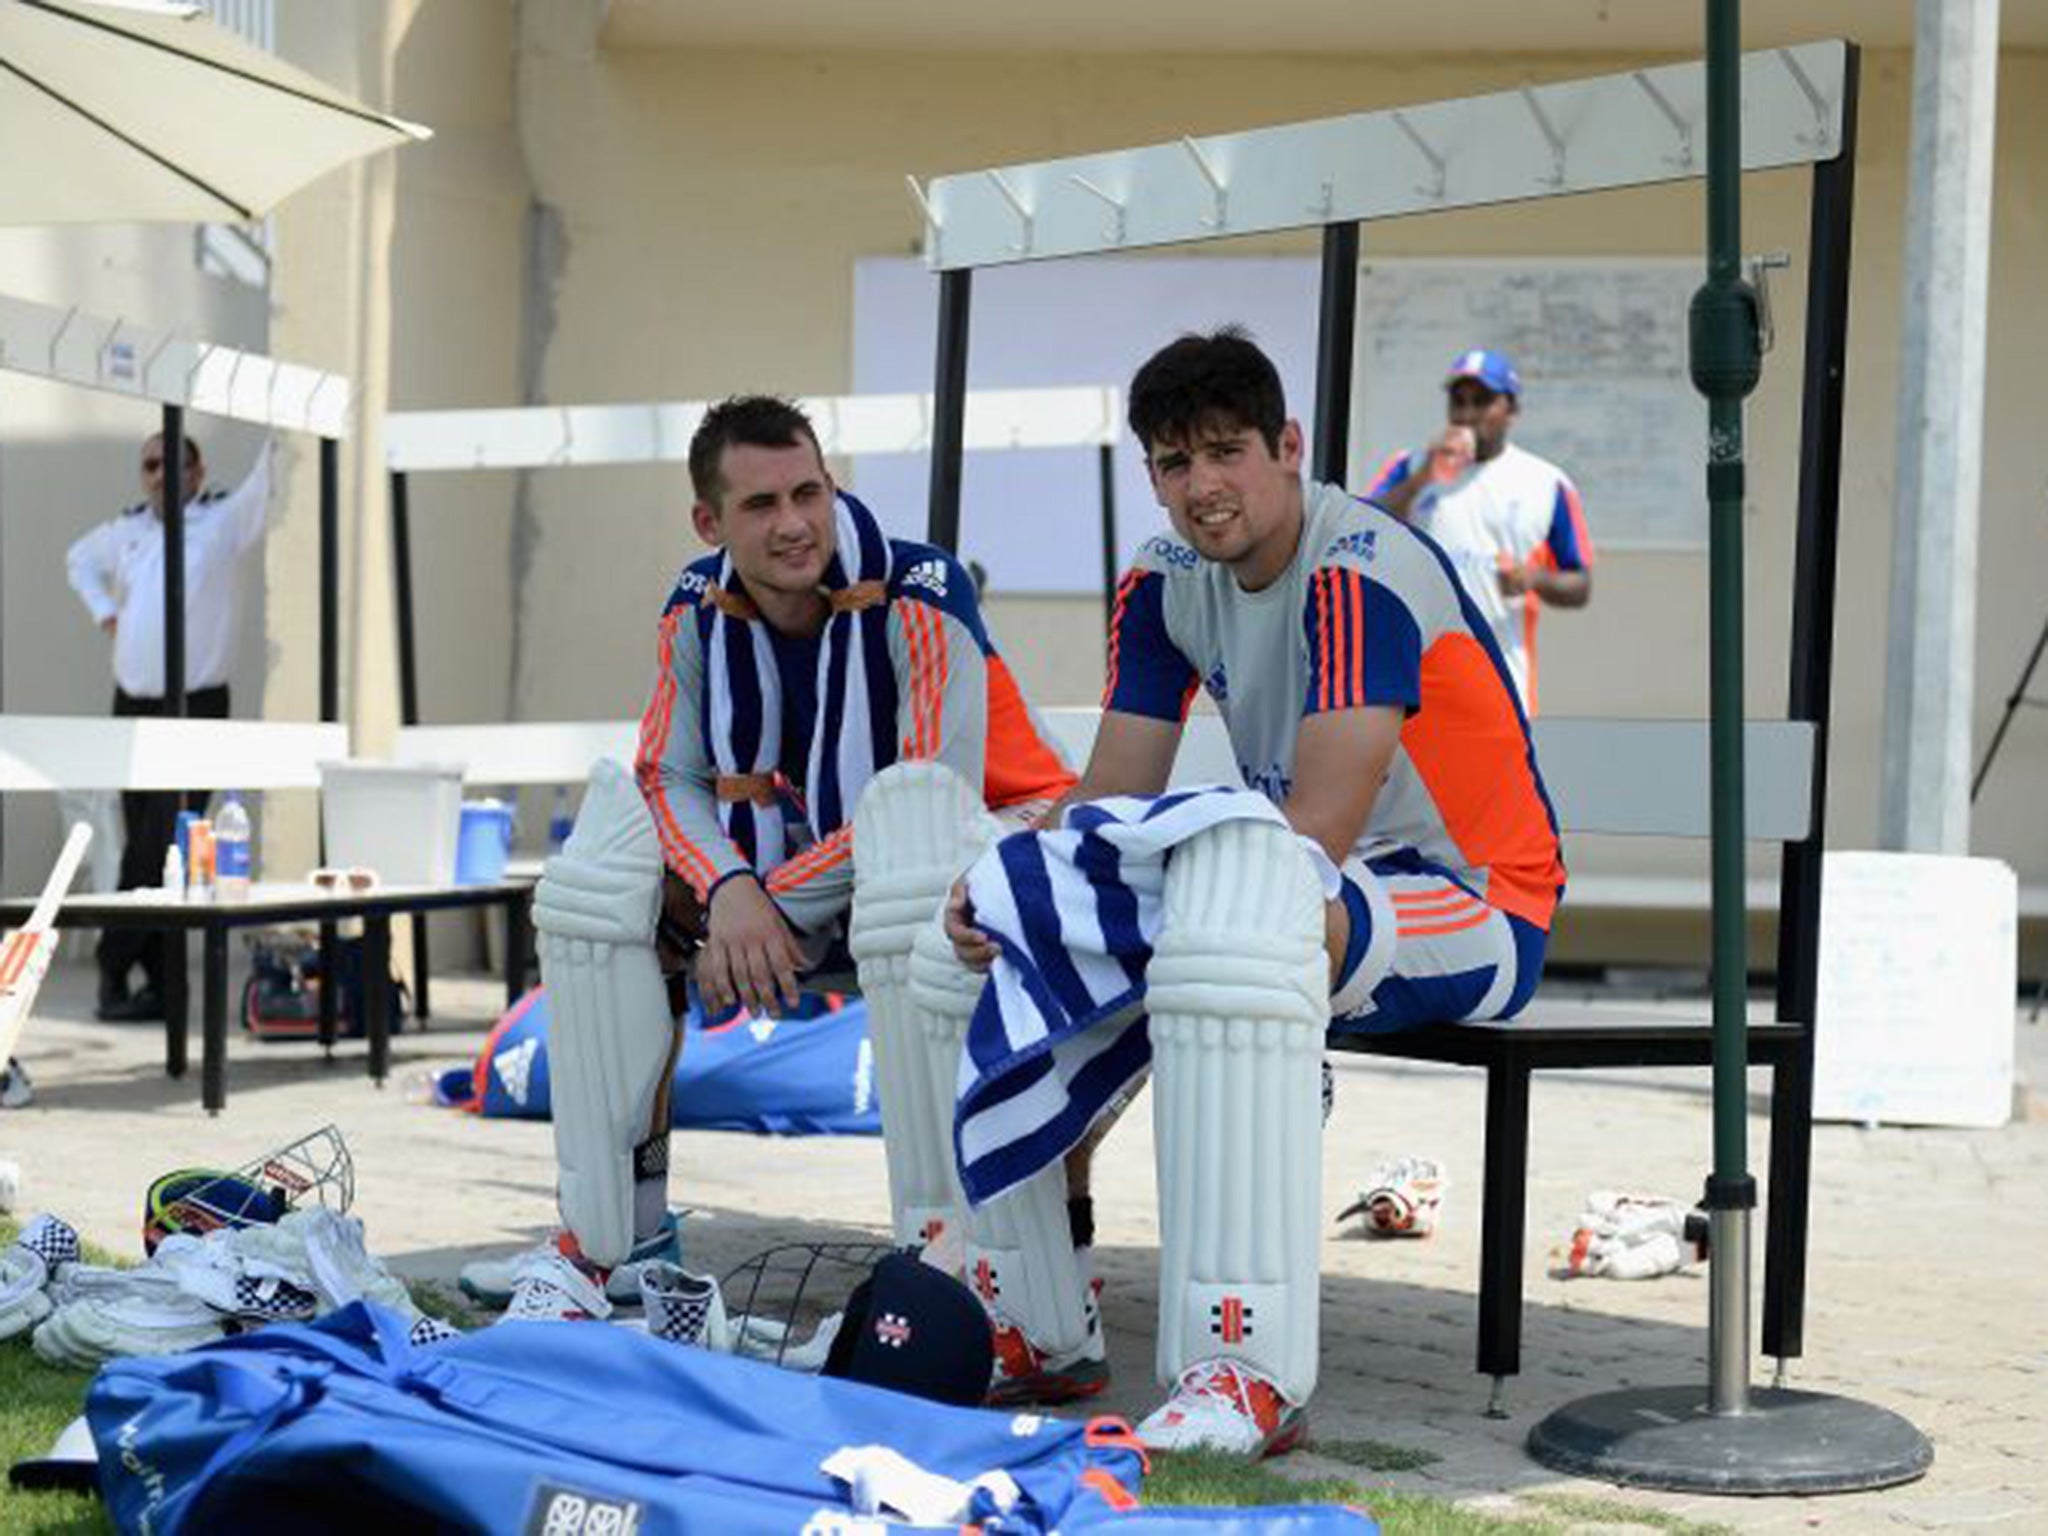 Alex Hales (left) sits with Alastair Cook during a net session in Sharjah